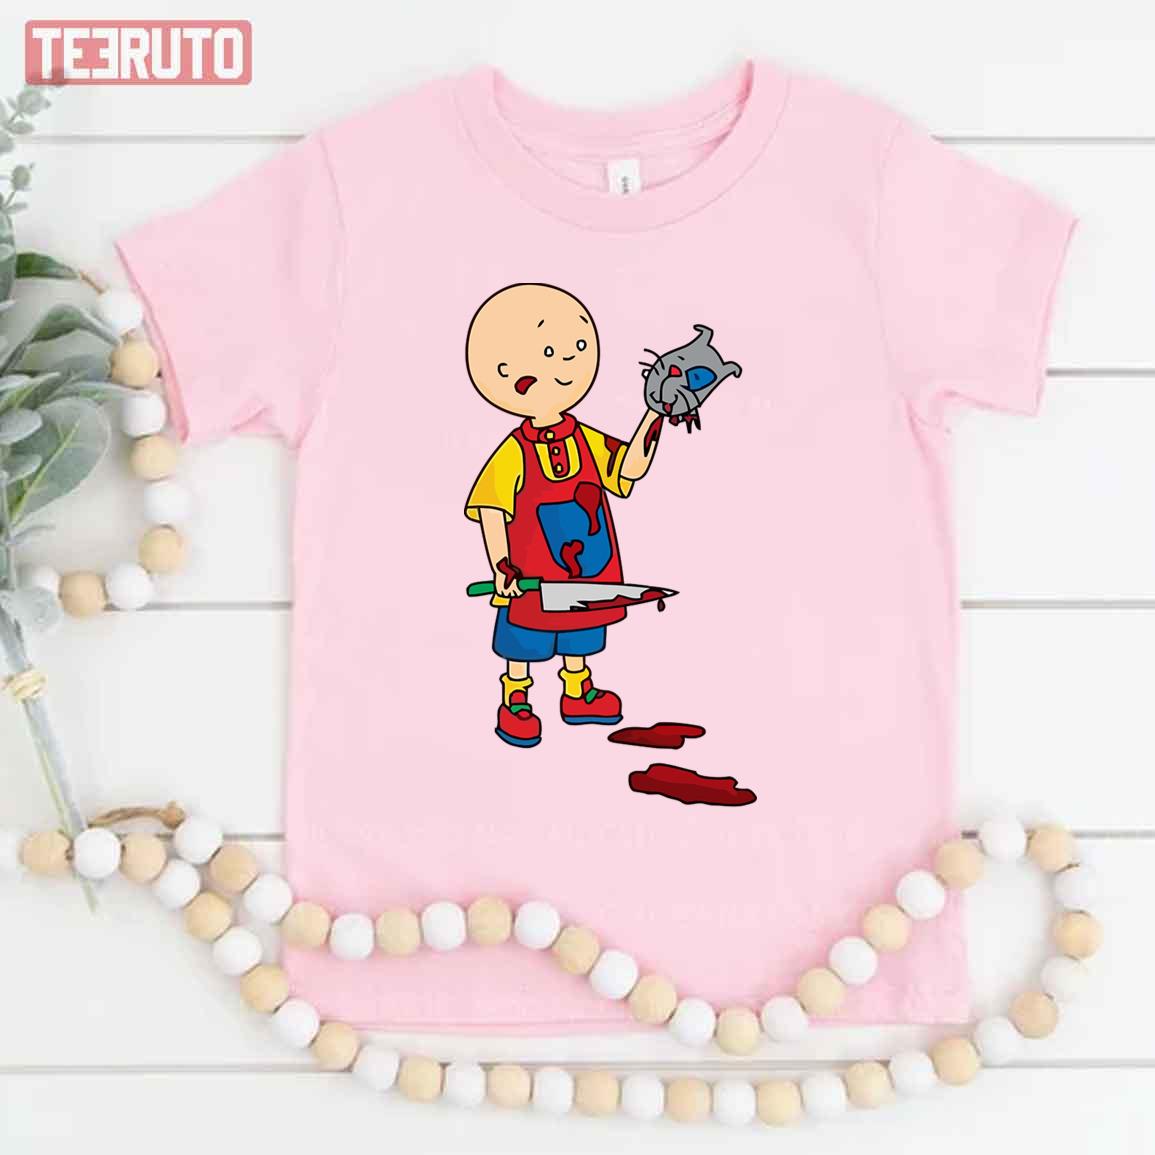 Carttooswag Scary Design For Halloween Caillou Unisex T-Shirt